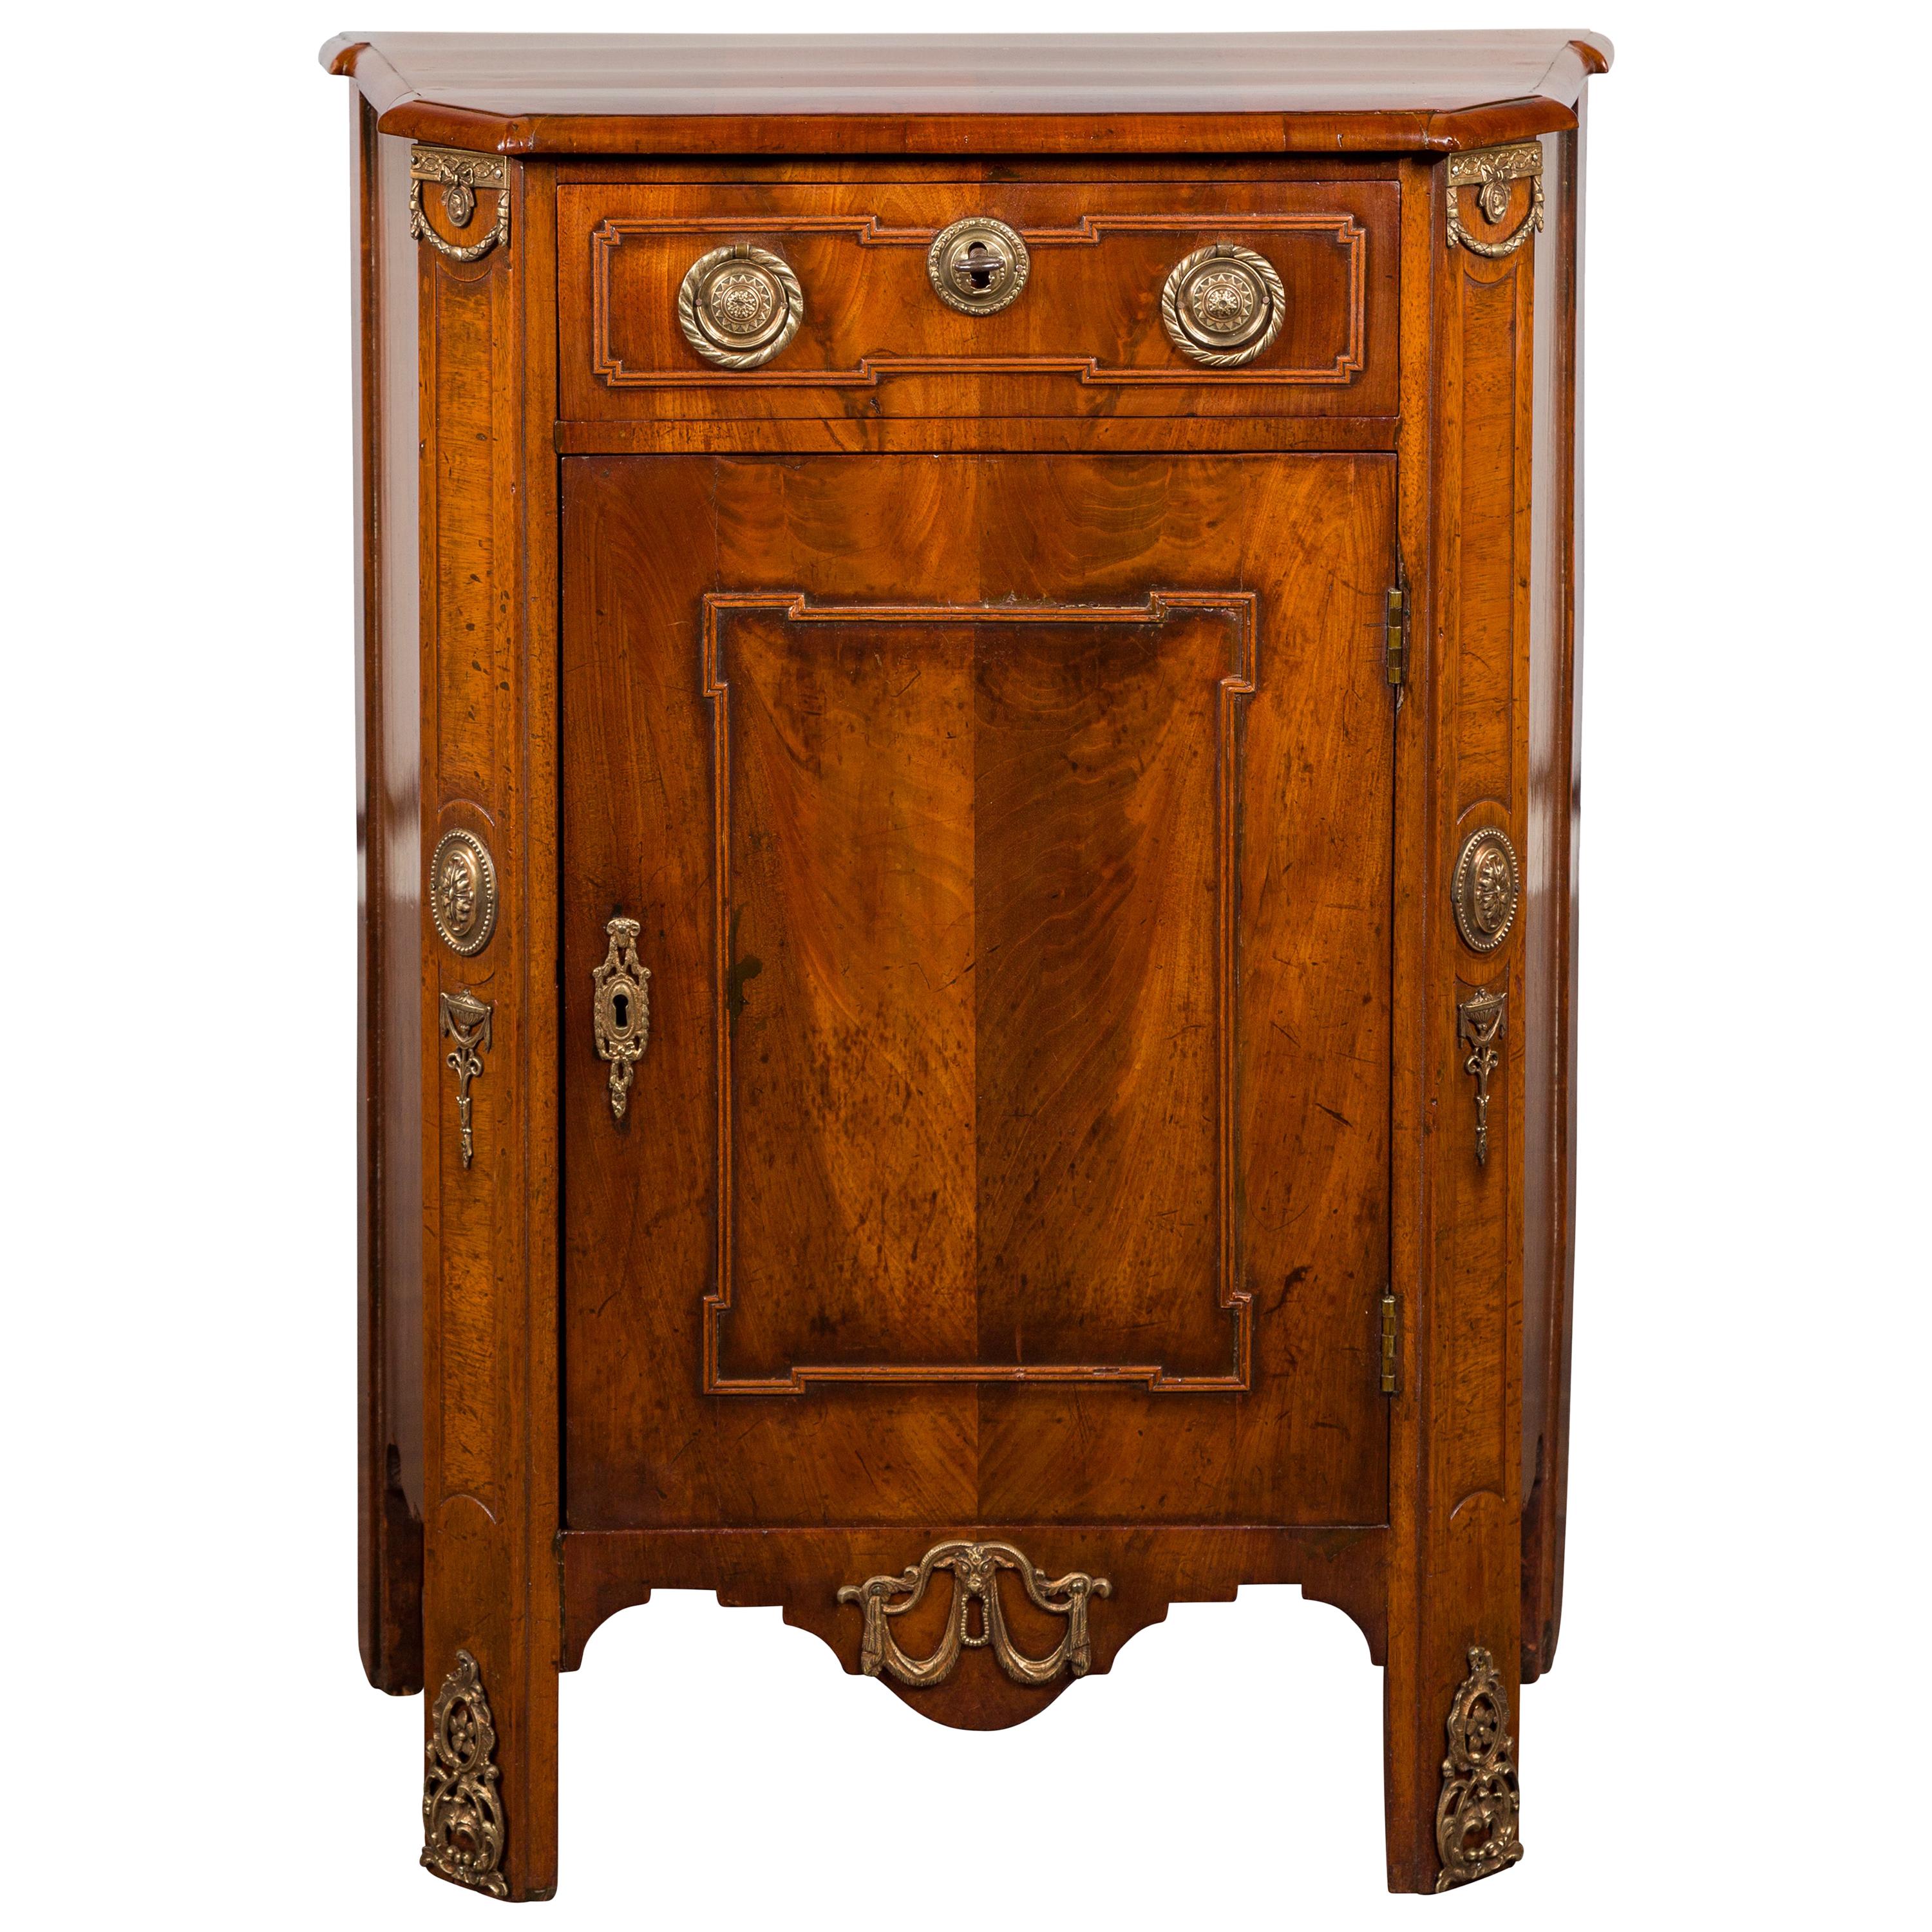 Dutch 19th Century Walnut Bedside Cabinet with Drawer, Door and Bronze Mounts